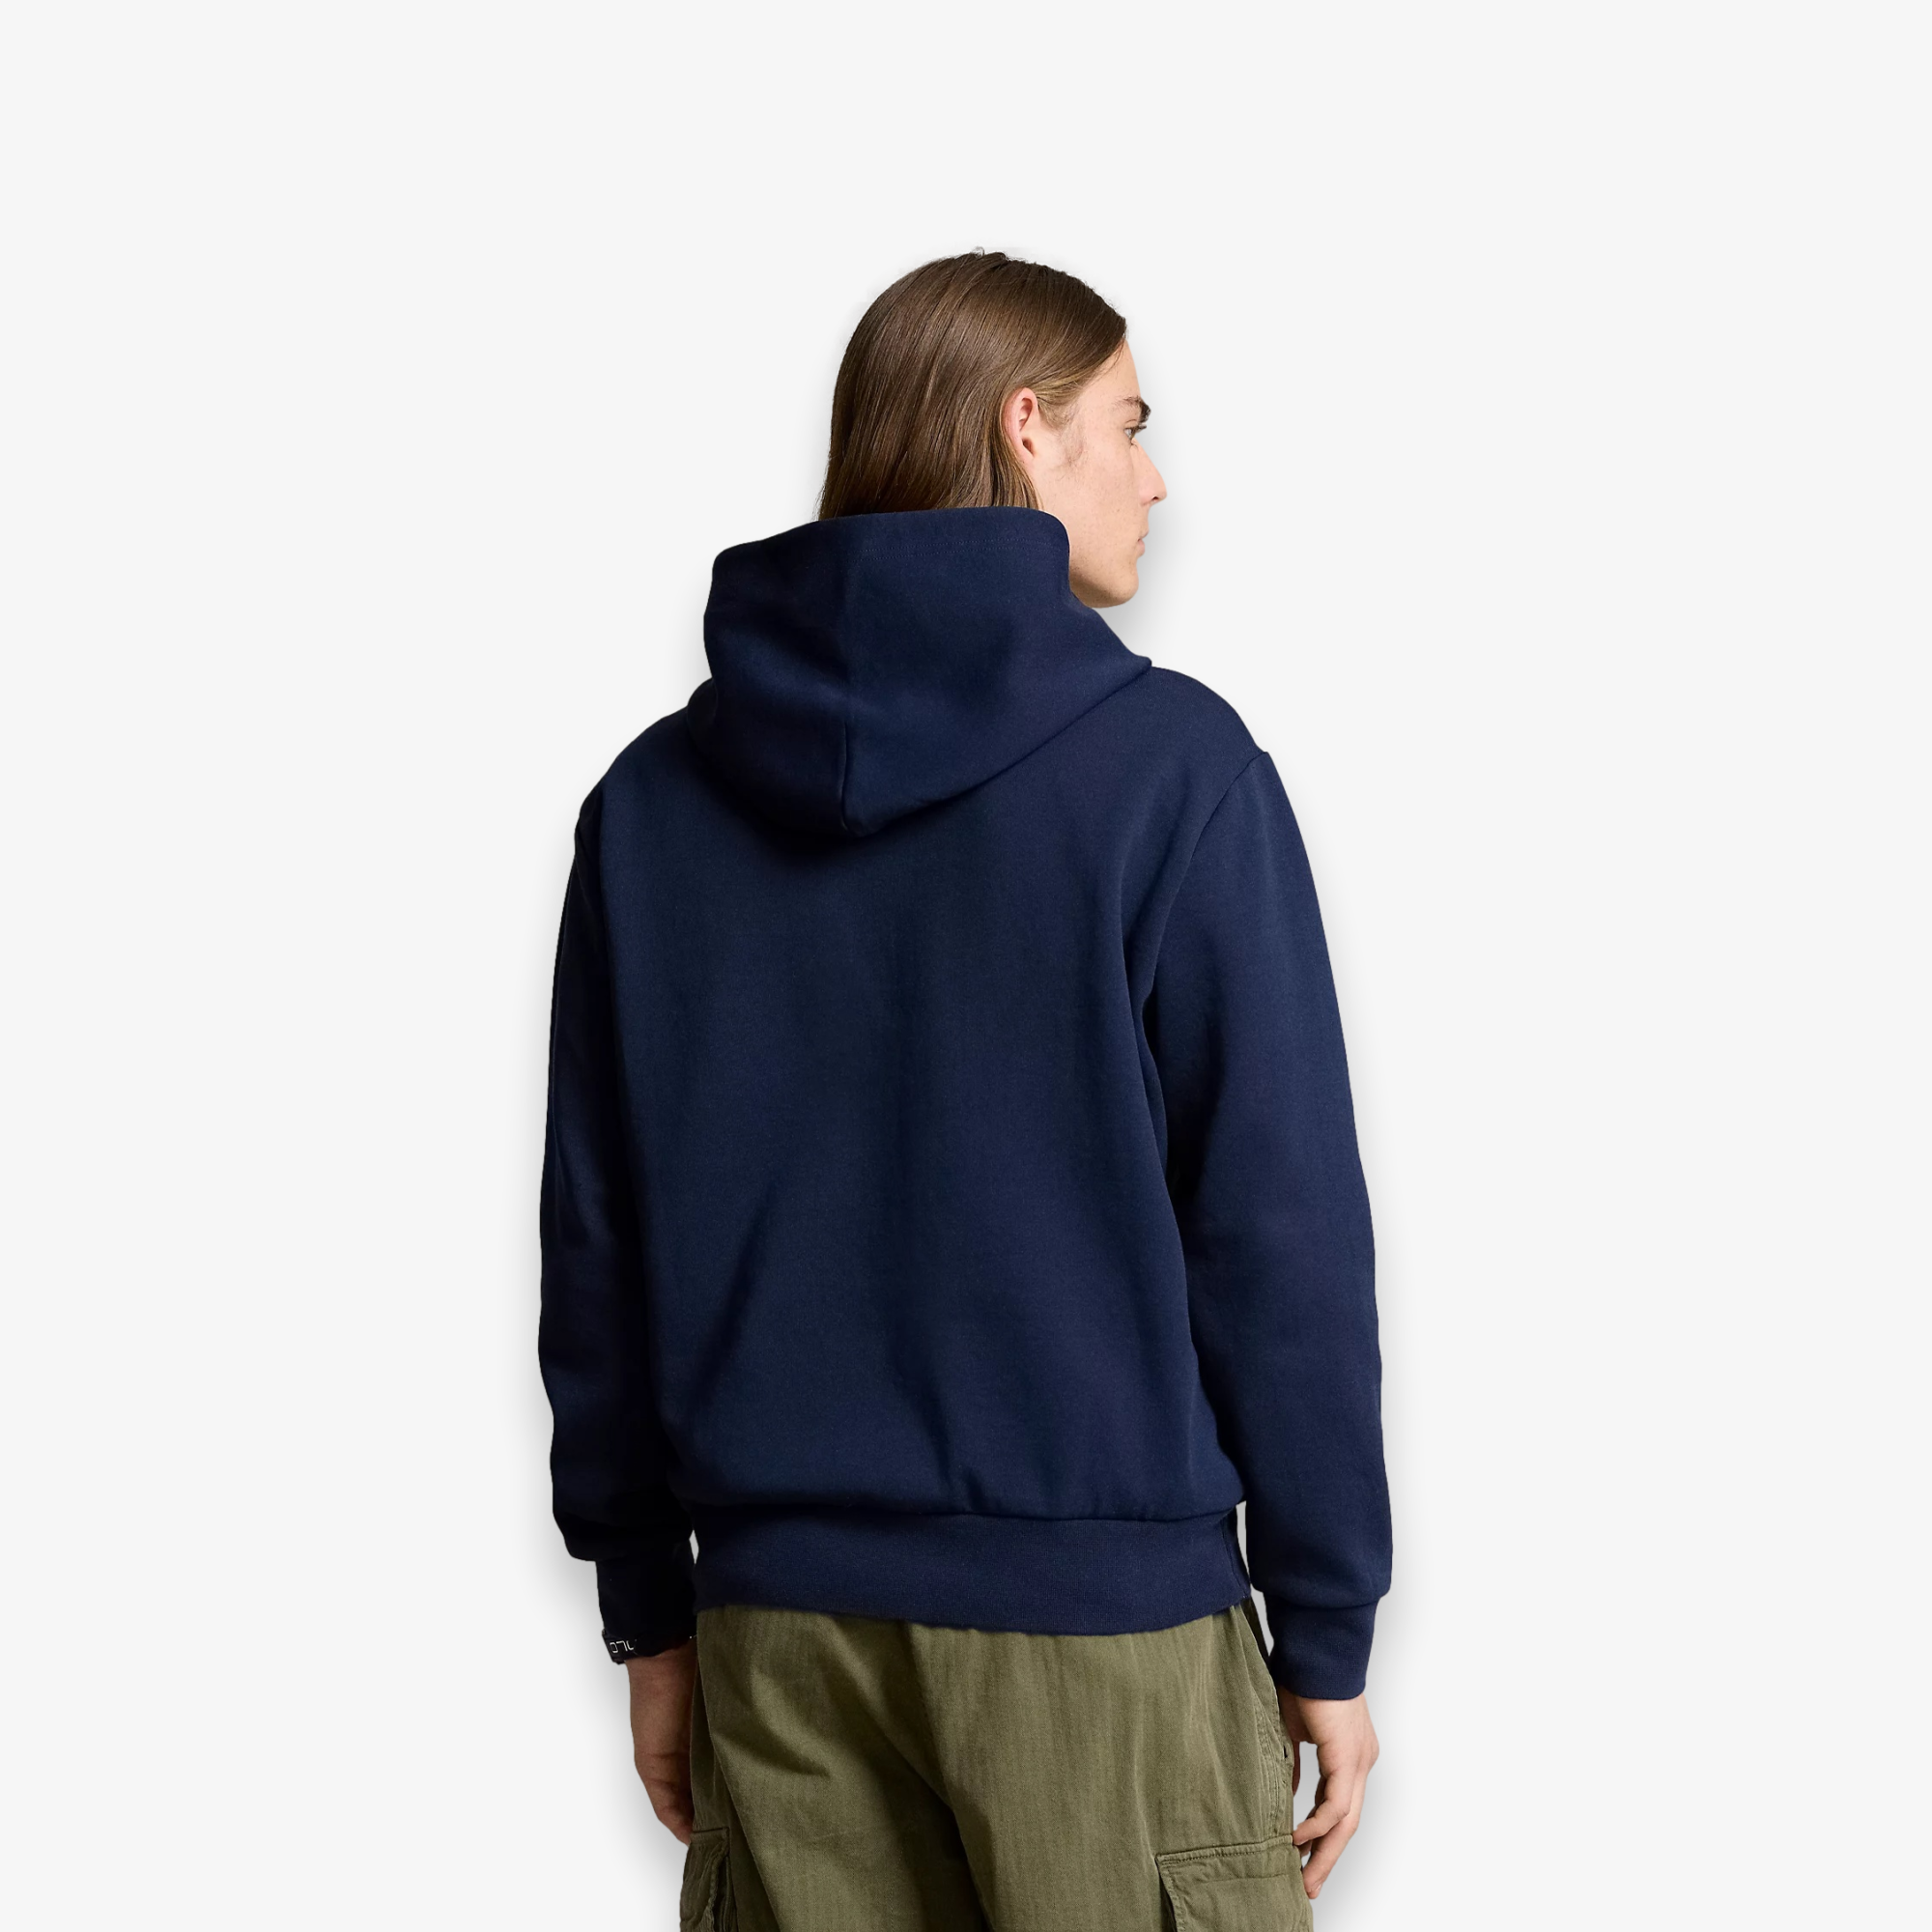 Double Knit Polo 1967 Hoodie